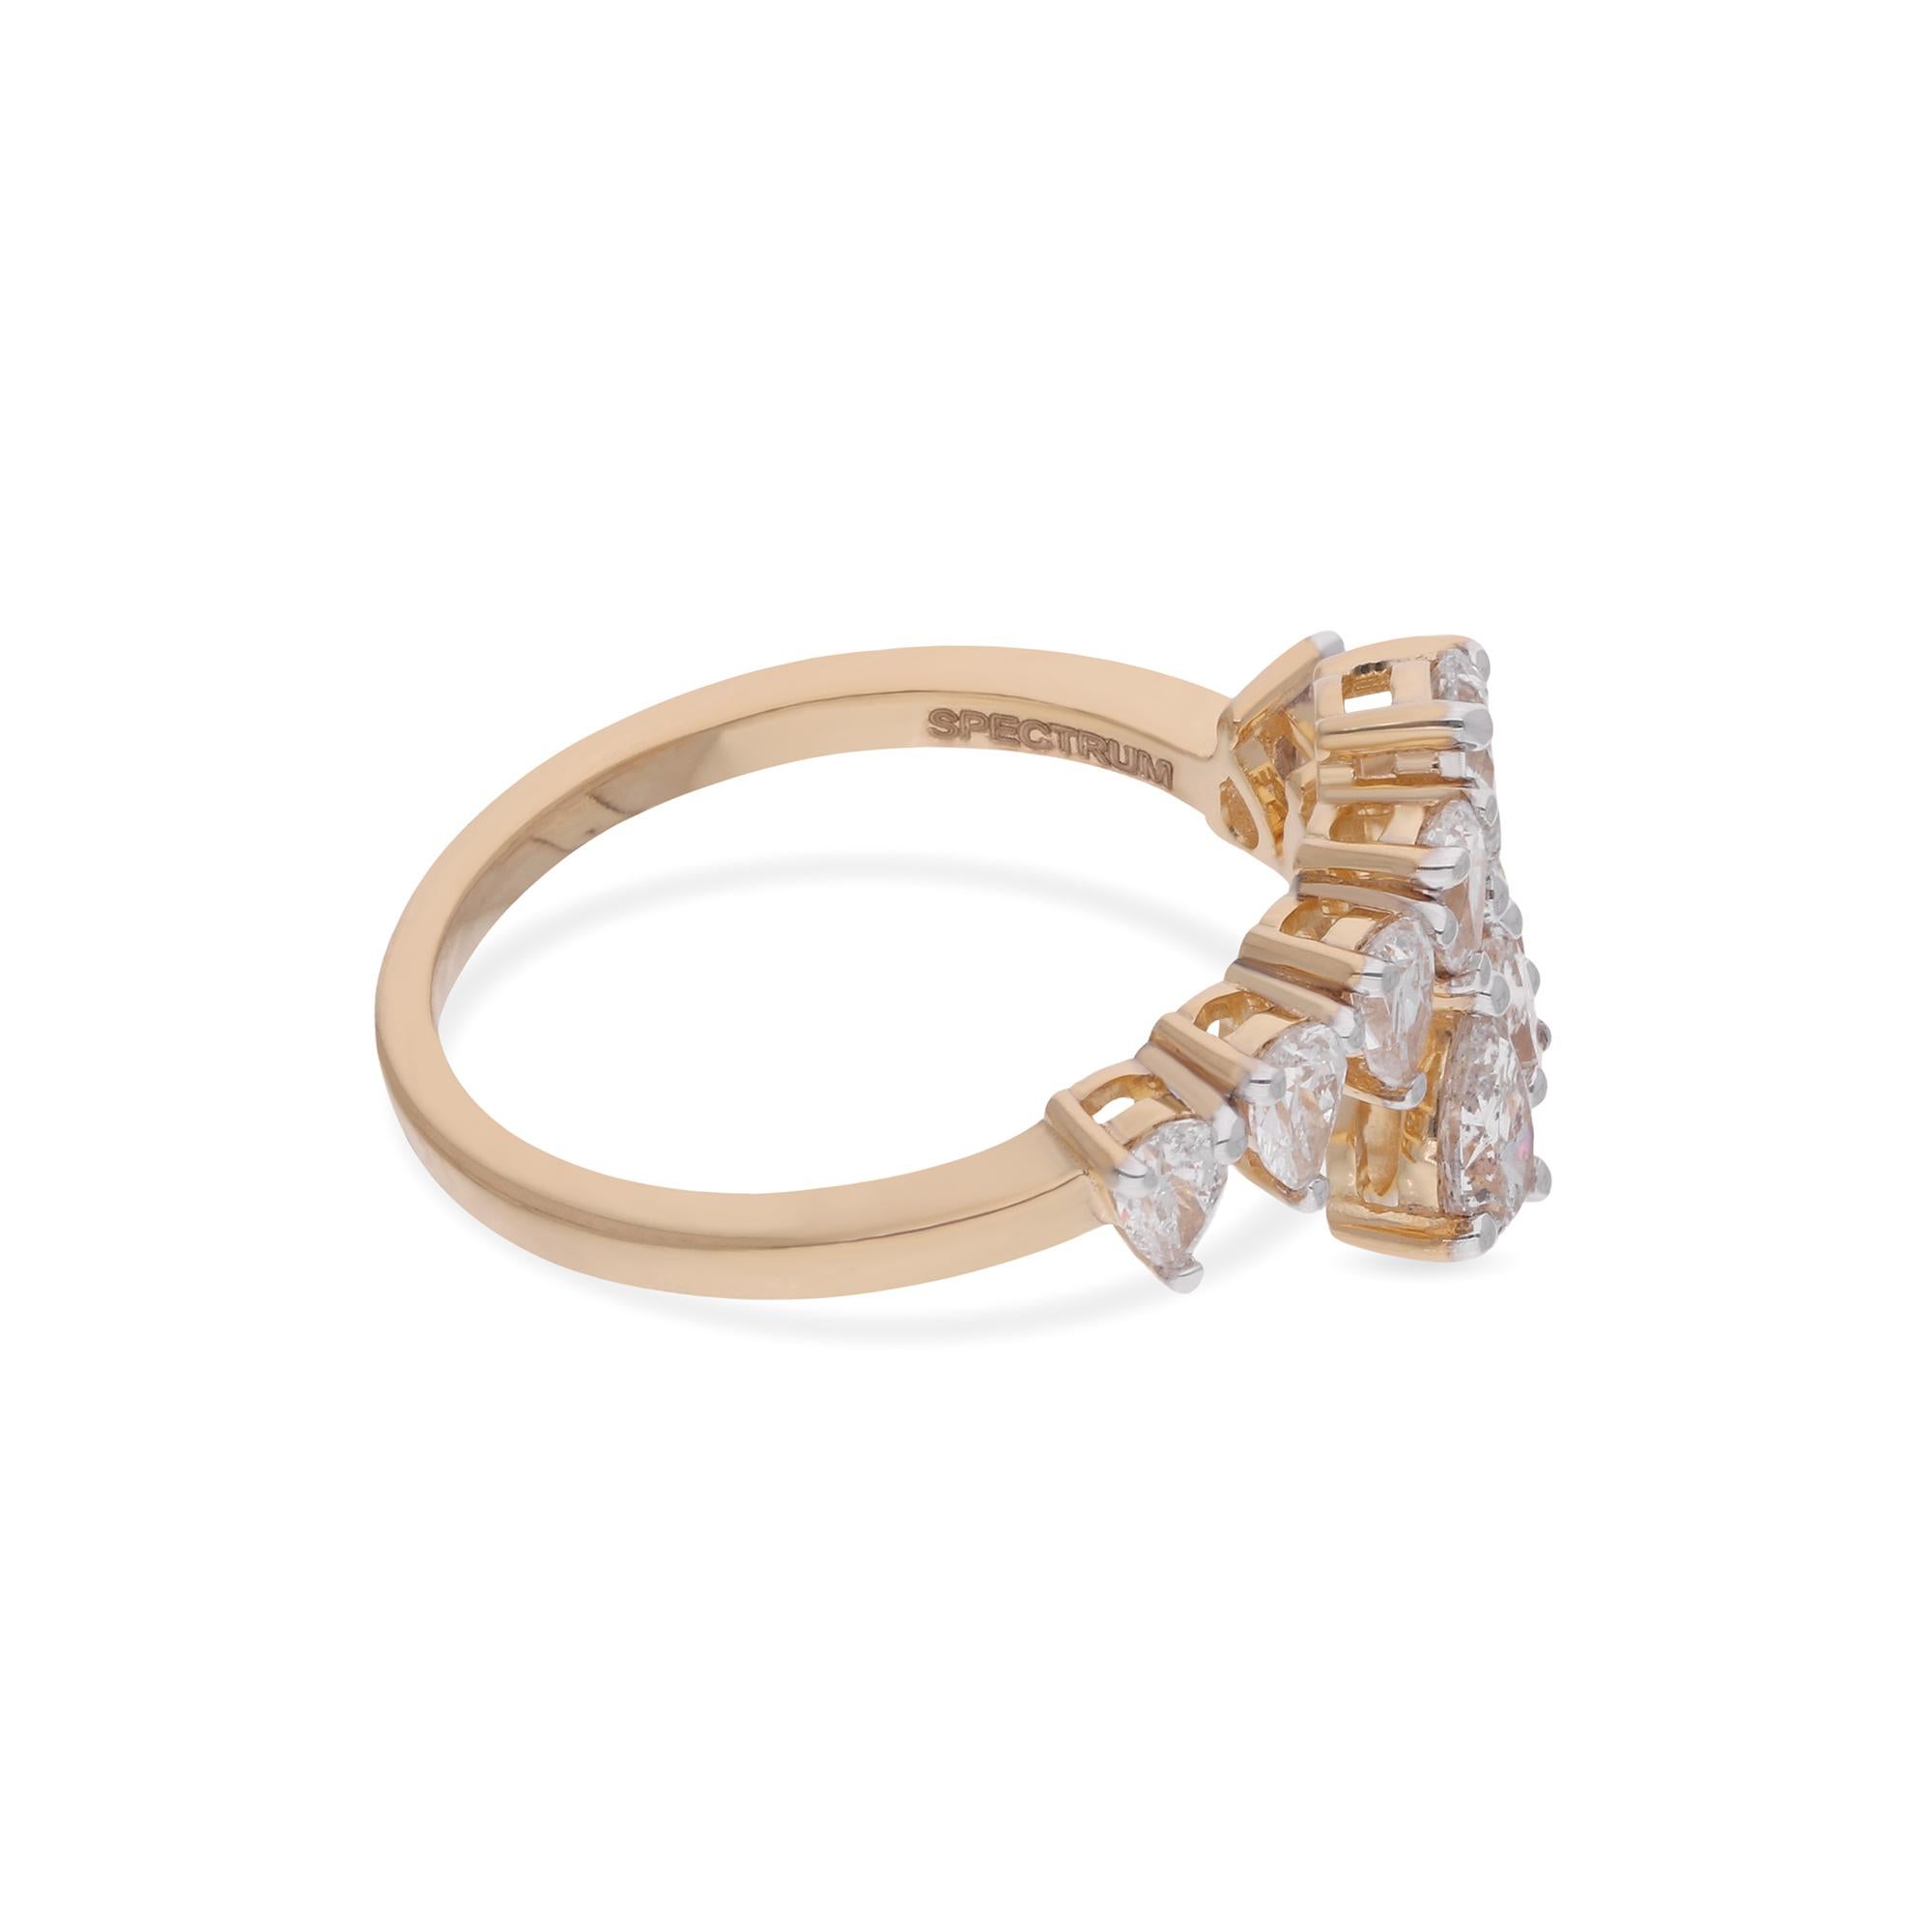 Elevate your style with the understated sophistication of this exquisite 0.9 carat SI clarity, H-I color diamond wrap ring, set in radiant 14 karat yellow gold. Crafted with precision and attention to detail, this ring is a timeless expression of